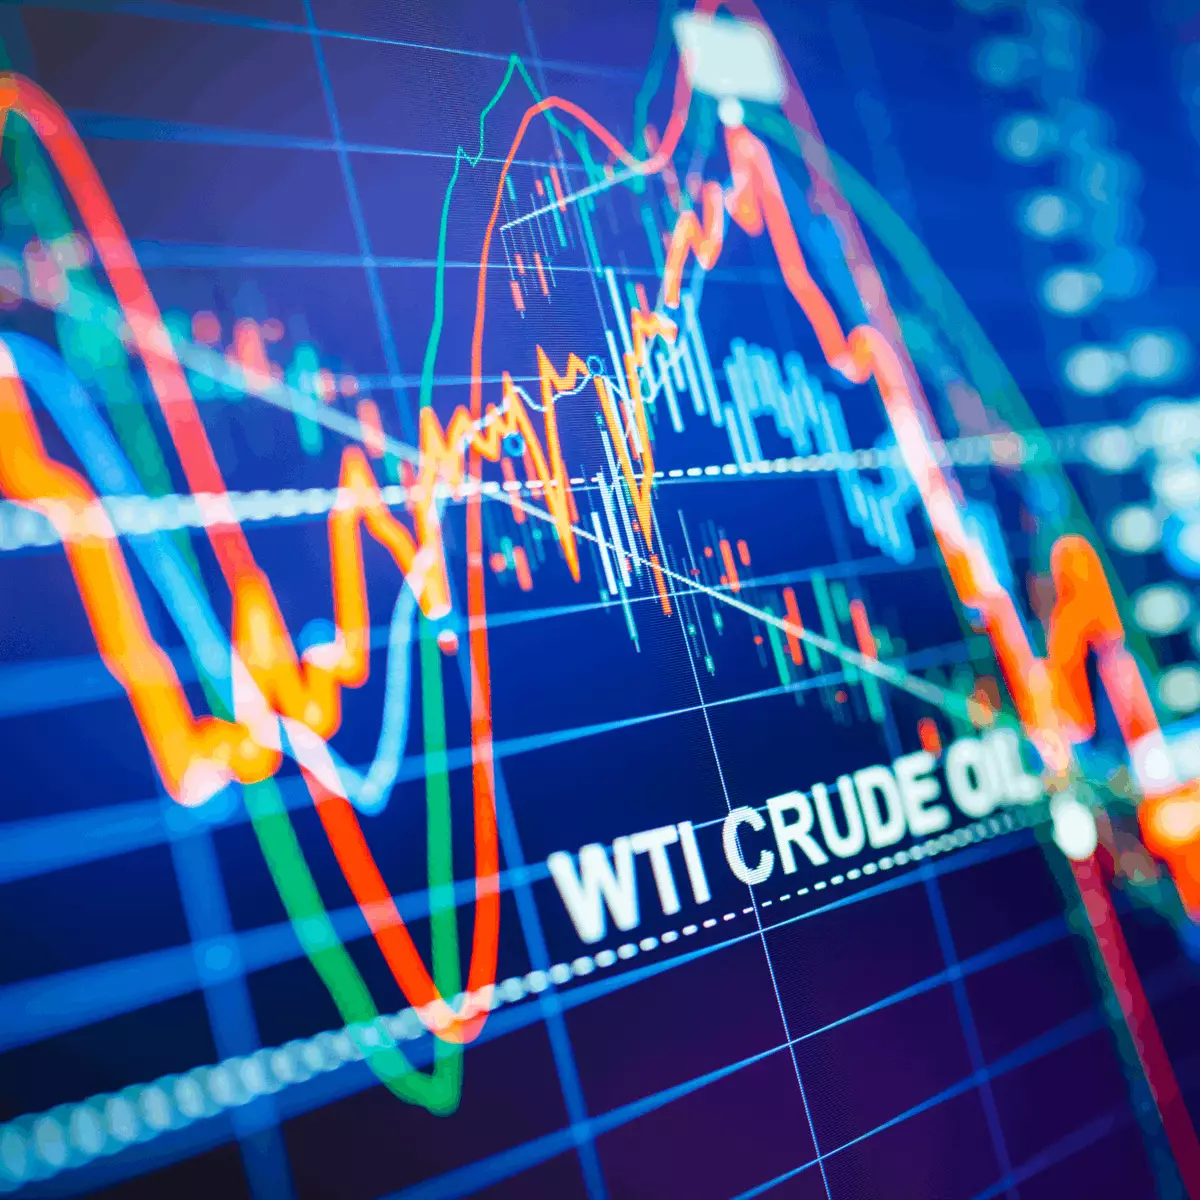 Open Interest In Crude Oil Futures And Options In Decline | Rigzone